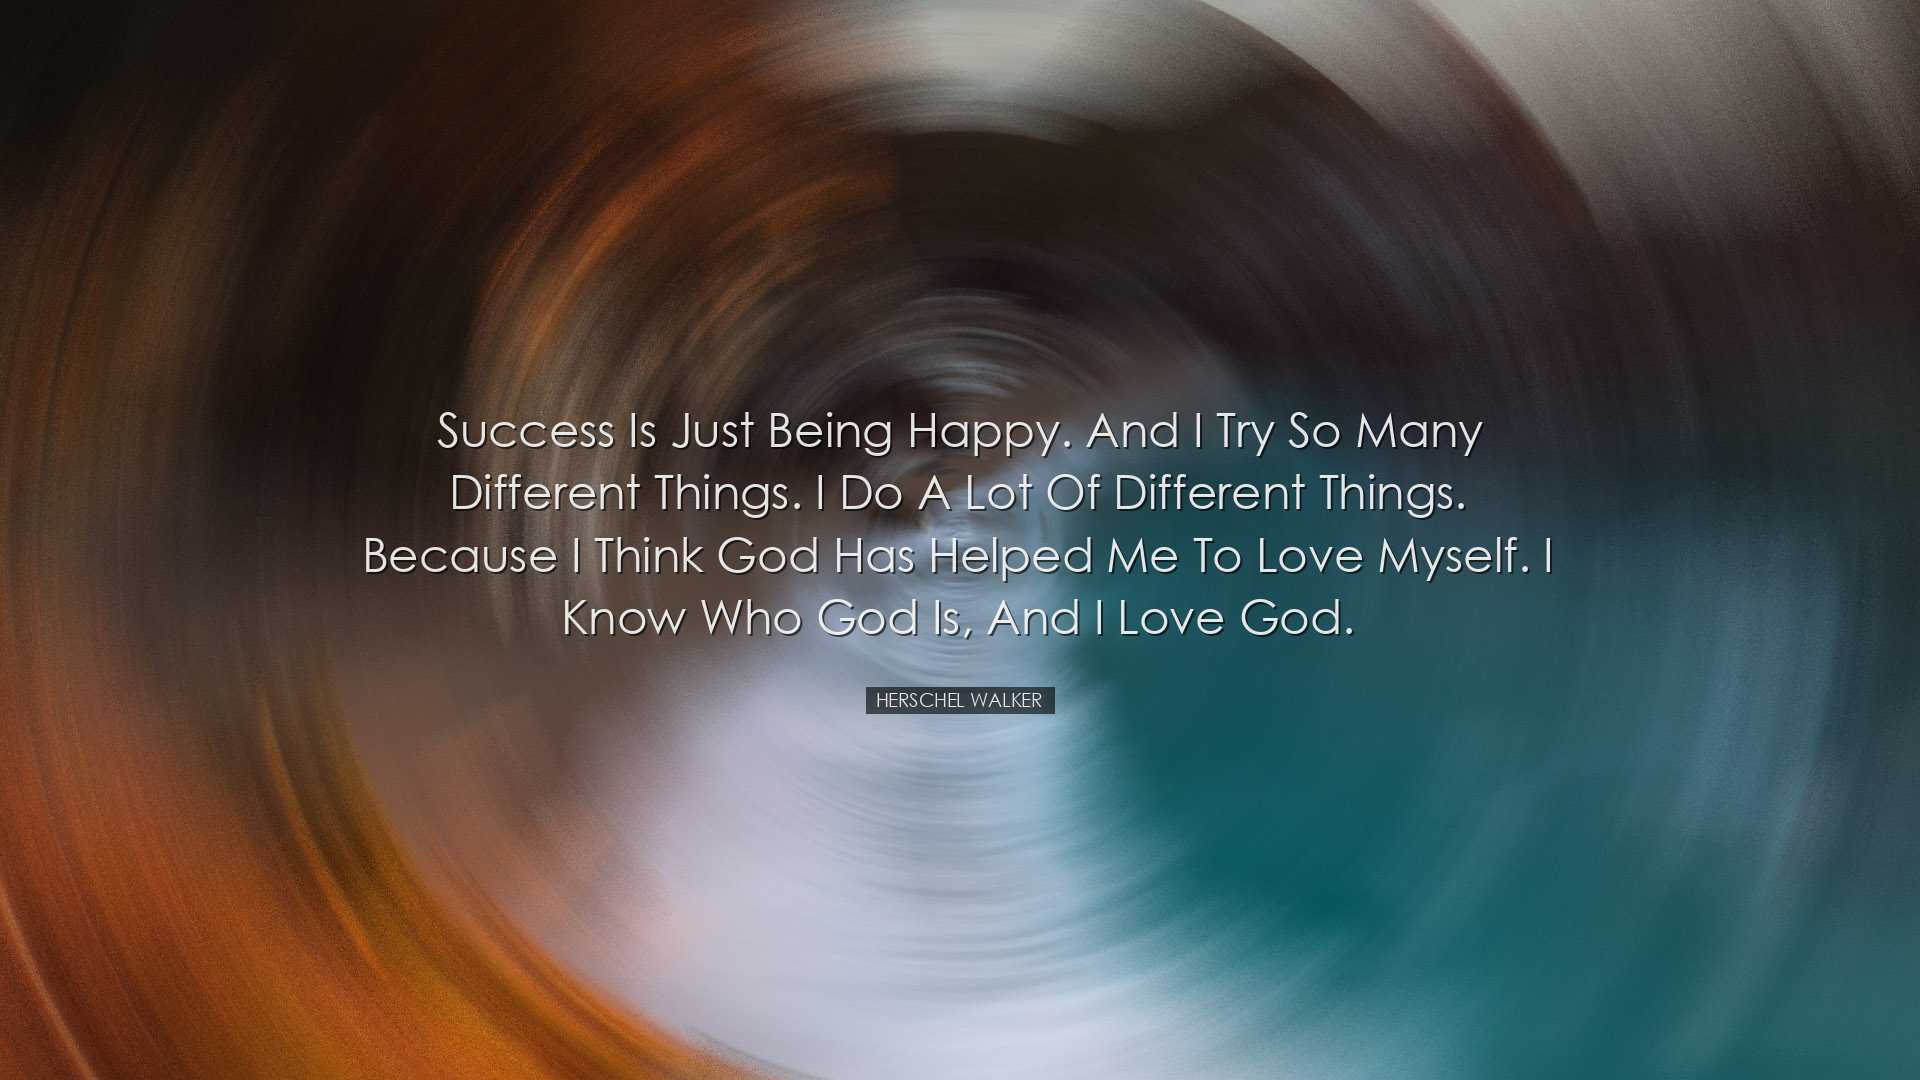 Success is just being happy. And I try so many different things. I